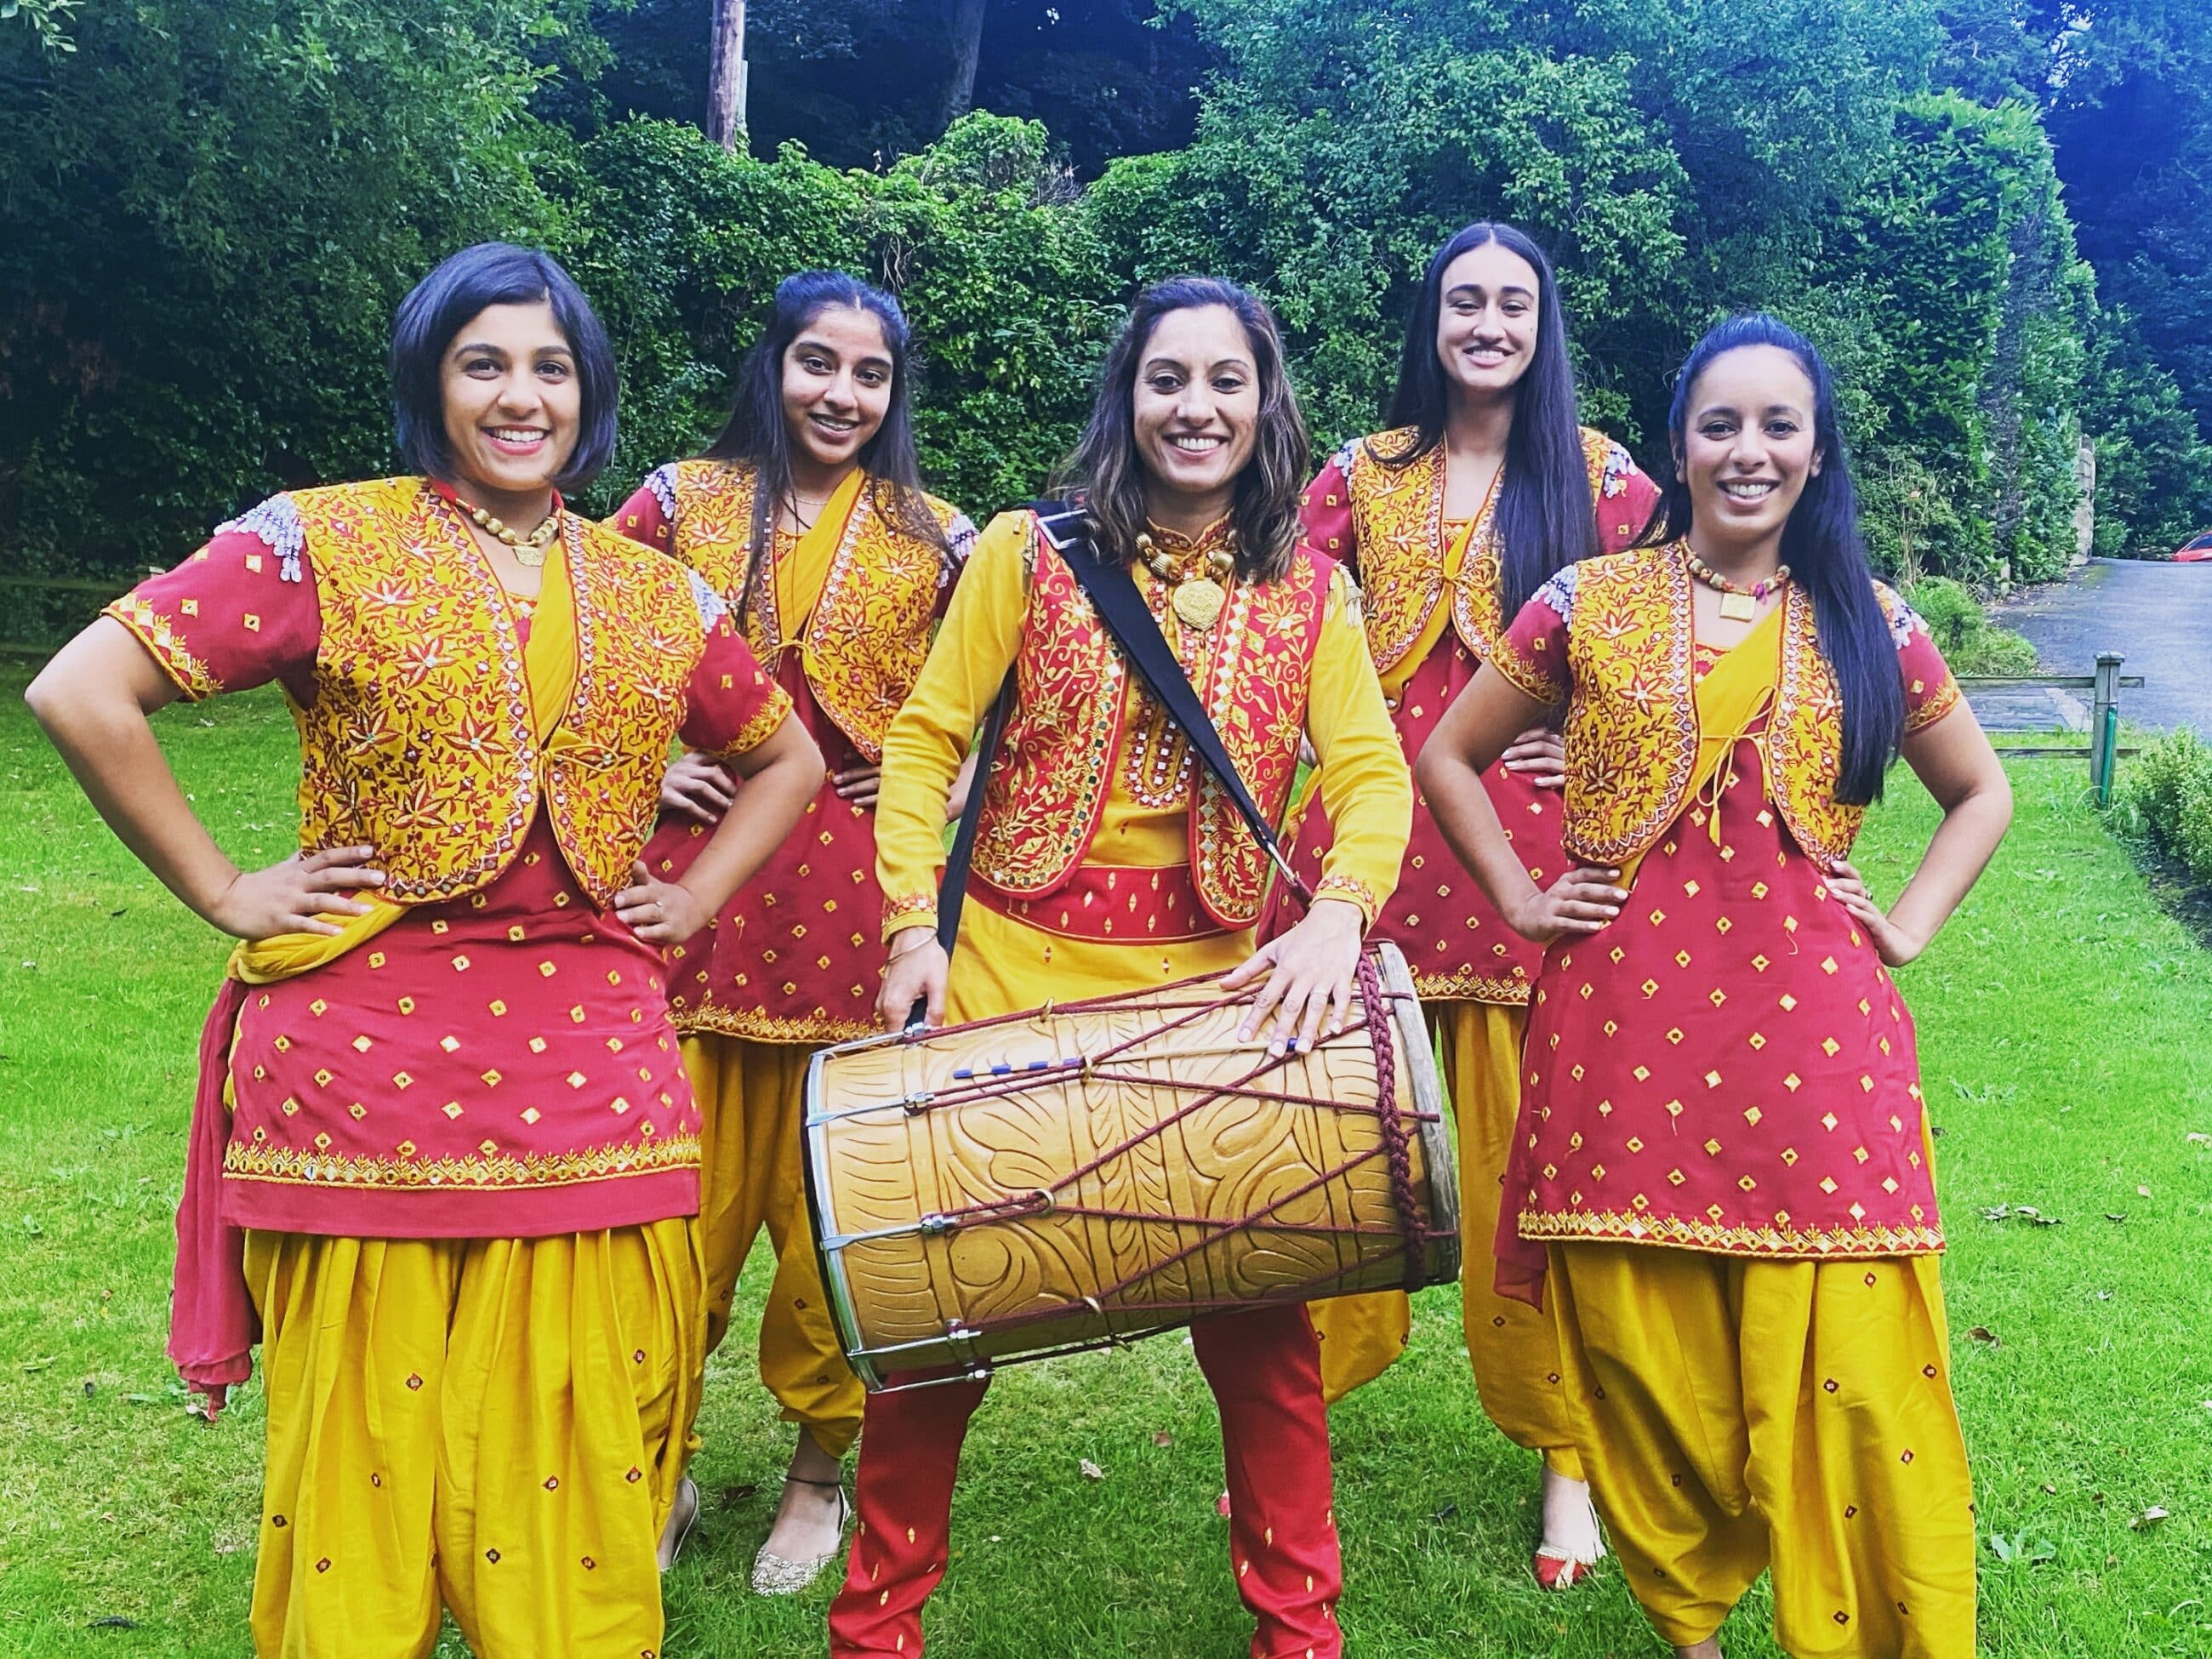 Five women in traditional Indian costumes pose with a drumming instrument.